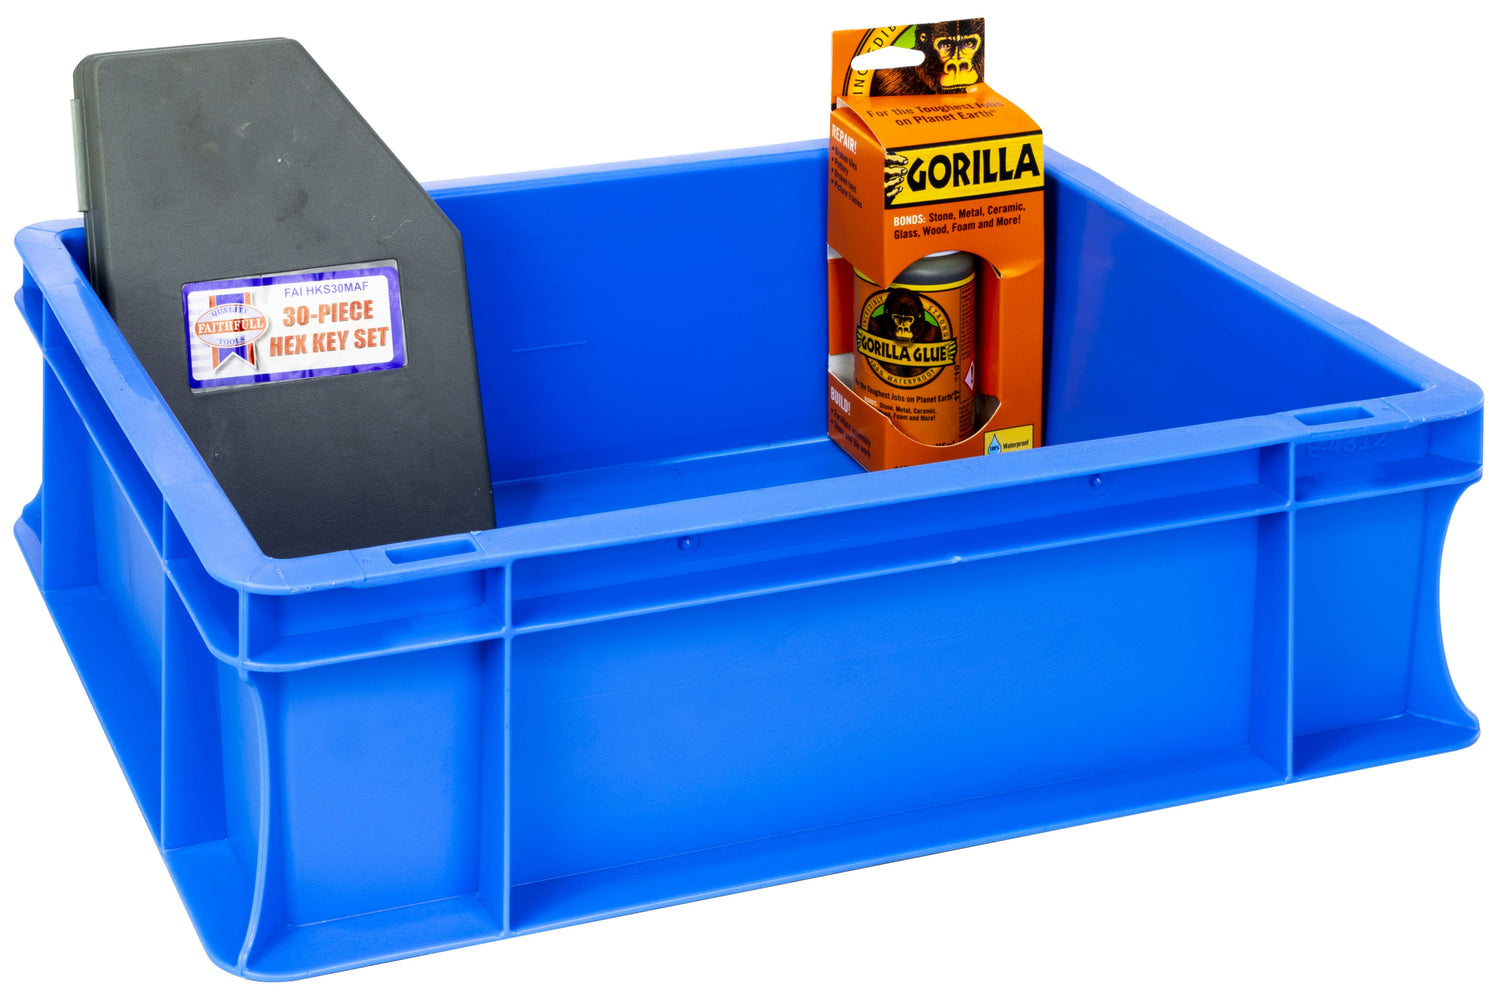 Coloured Euro Stacking Containers (4 Sizes) - Filstorage 10L (Pack of 5) 400 x 300 x 120mm / Blue